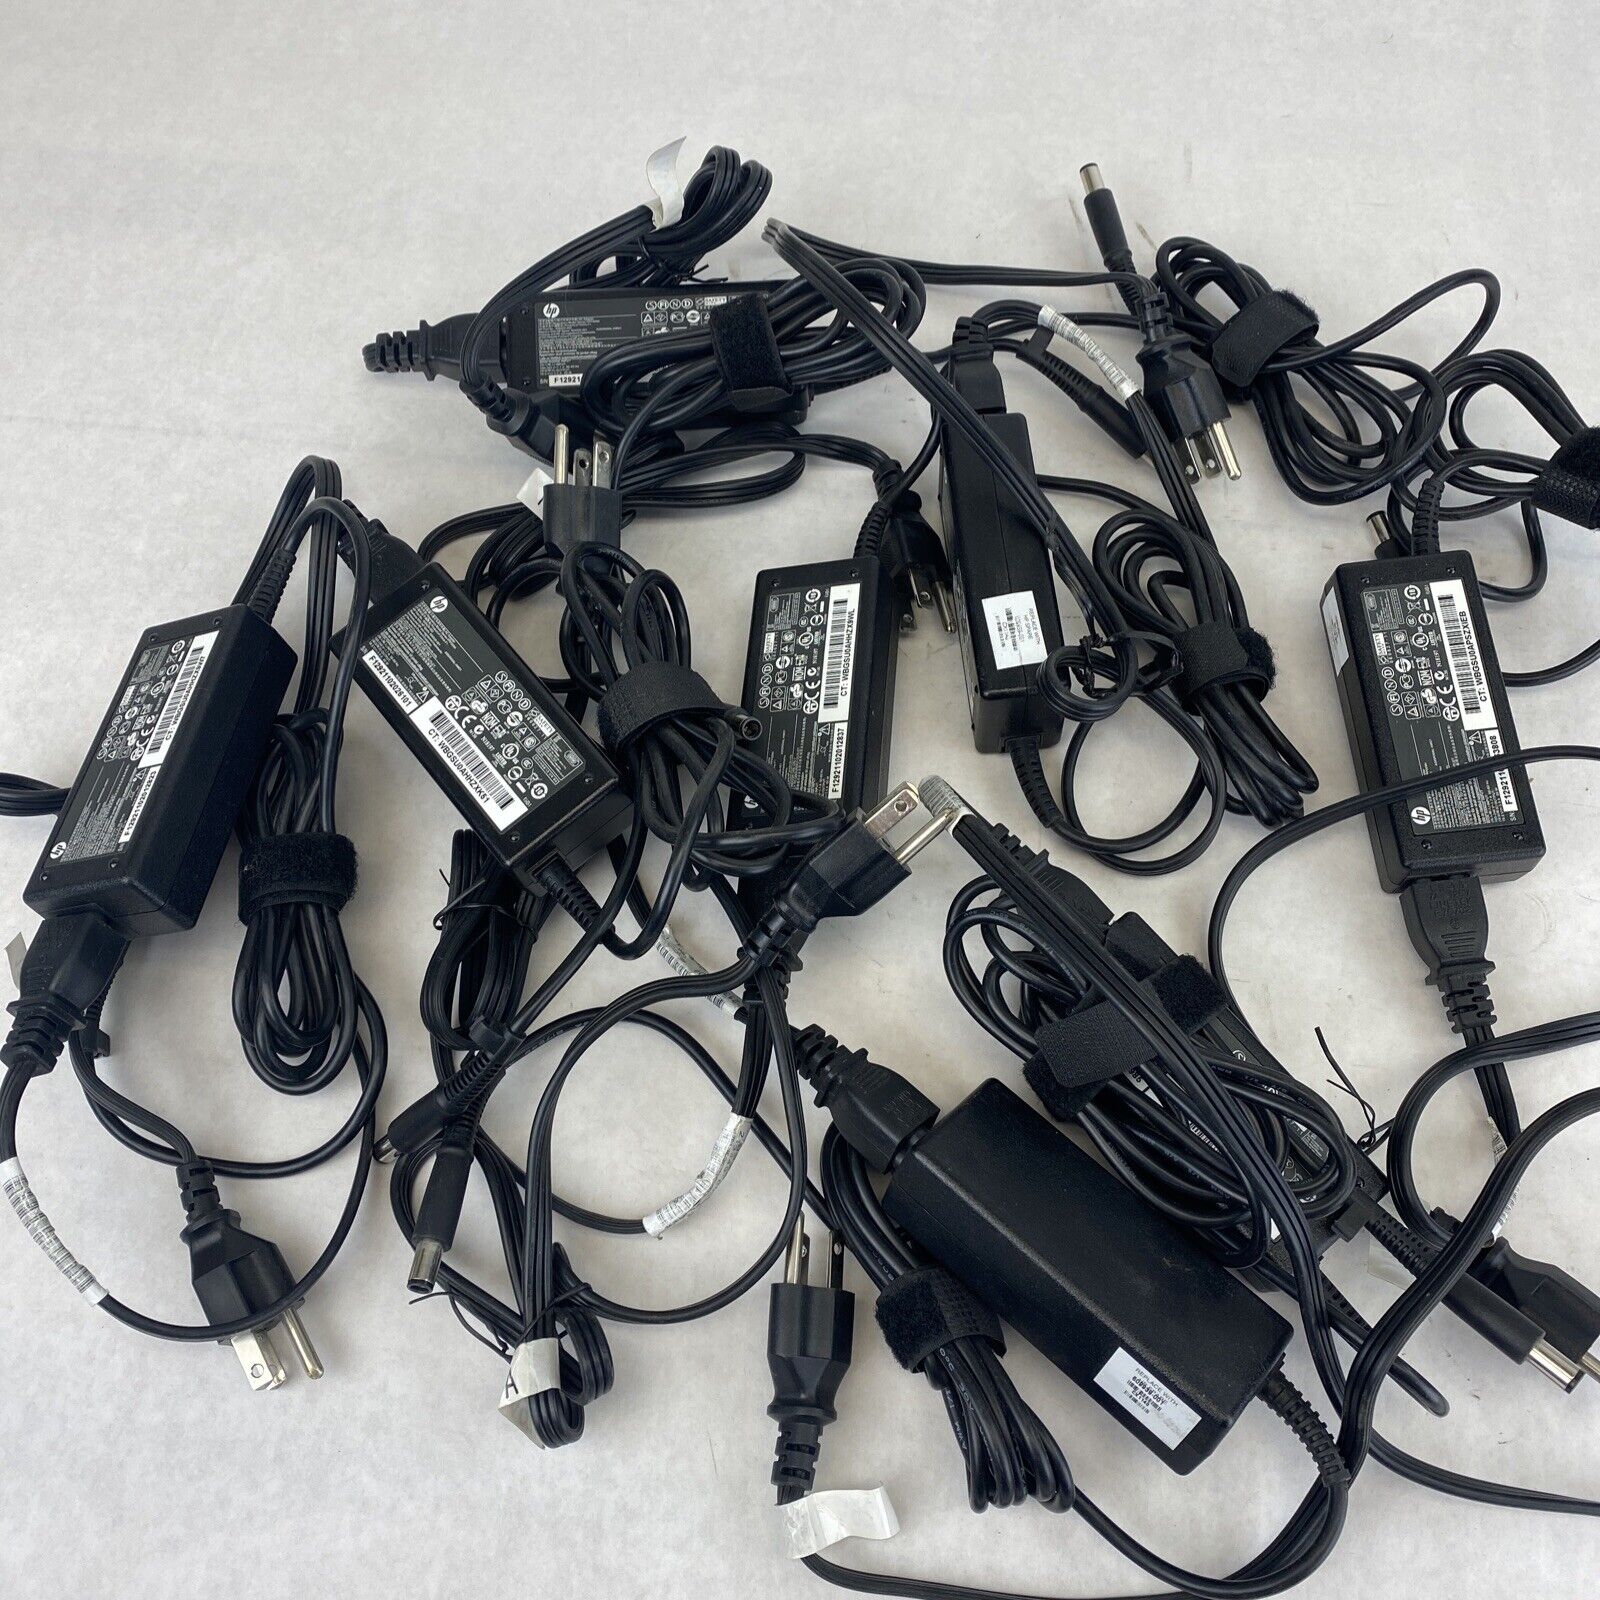 Lot of 8 HP 608425-002 genuine laptop charger AC power adapter 18.5V 3.5A 65W